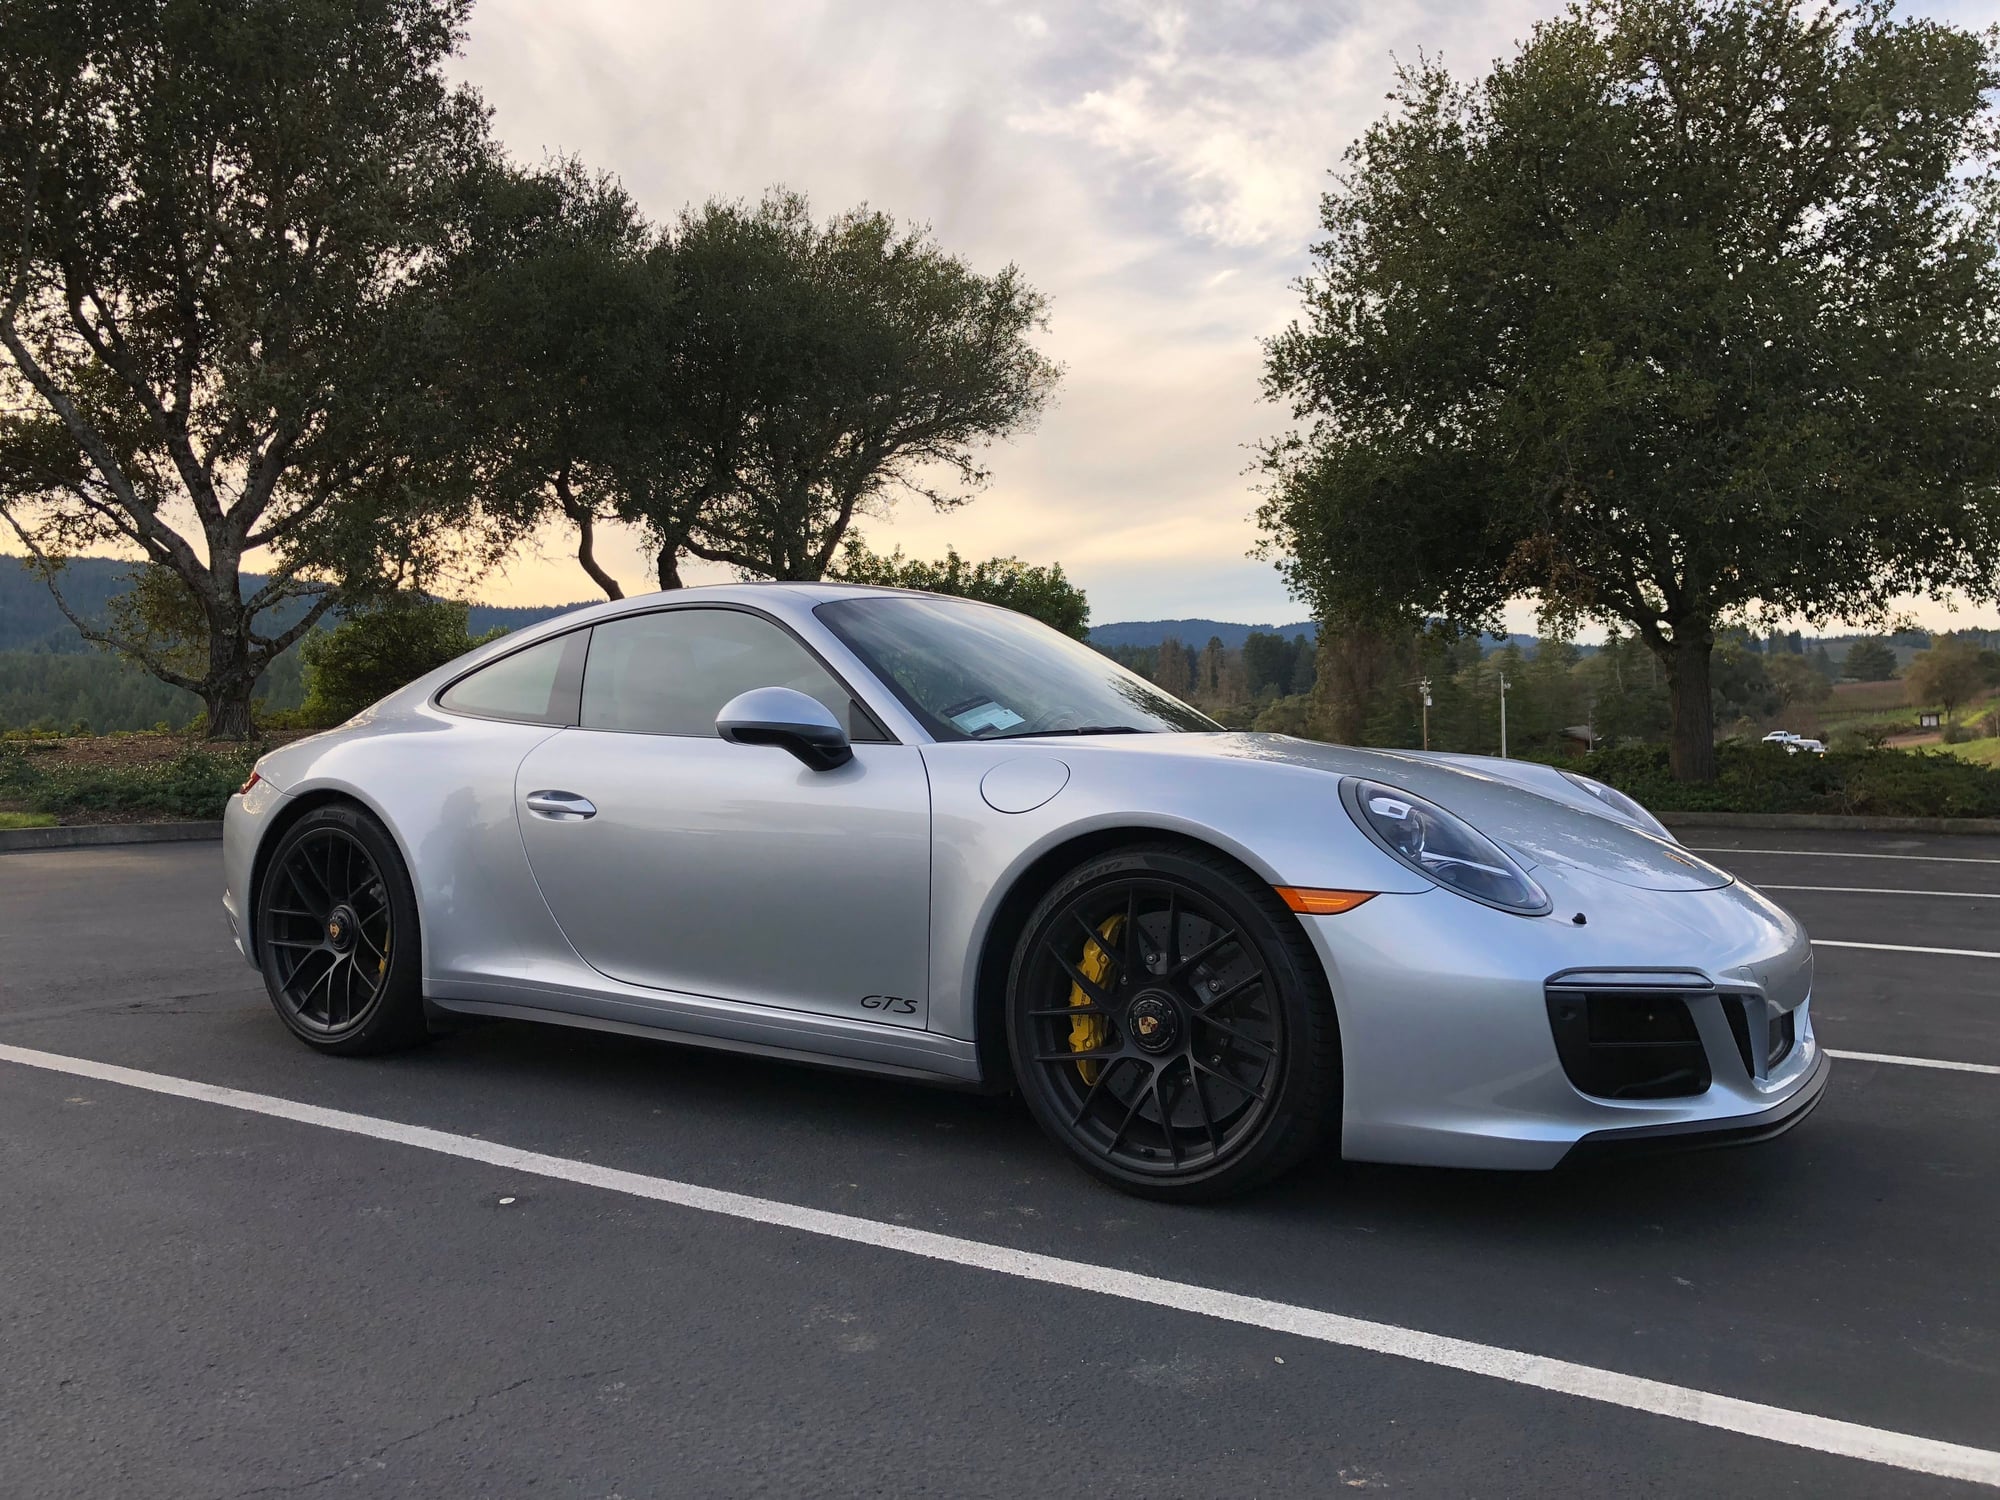 2018 Porsche 911 - 2018 all options 911 4 GTS manual - Used - VIN WP0AB2A99JS123020 - 5,600 Miles - 6 cyl - 4WD - Manual - Coupe - Other - Sacramento, CA 95816, United States